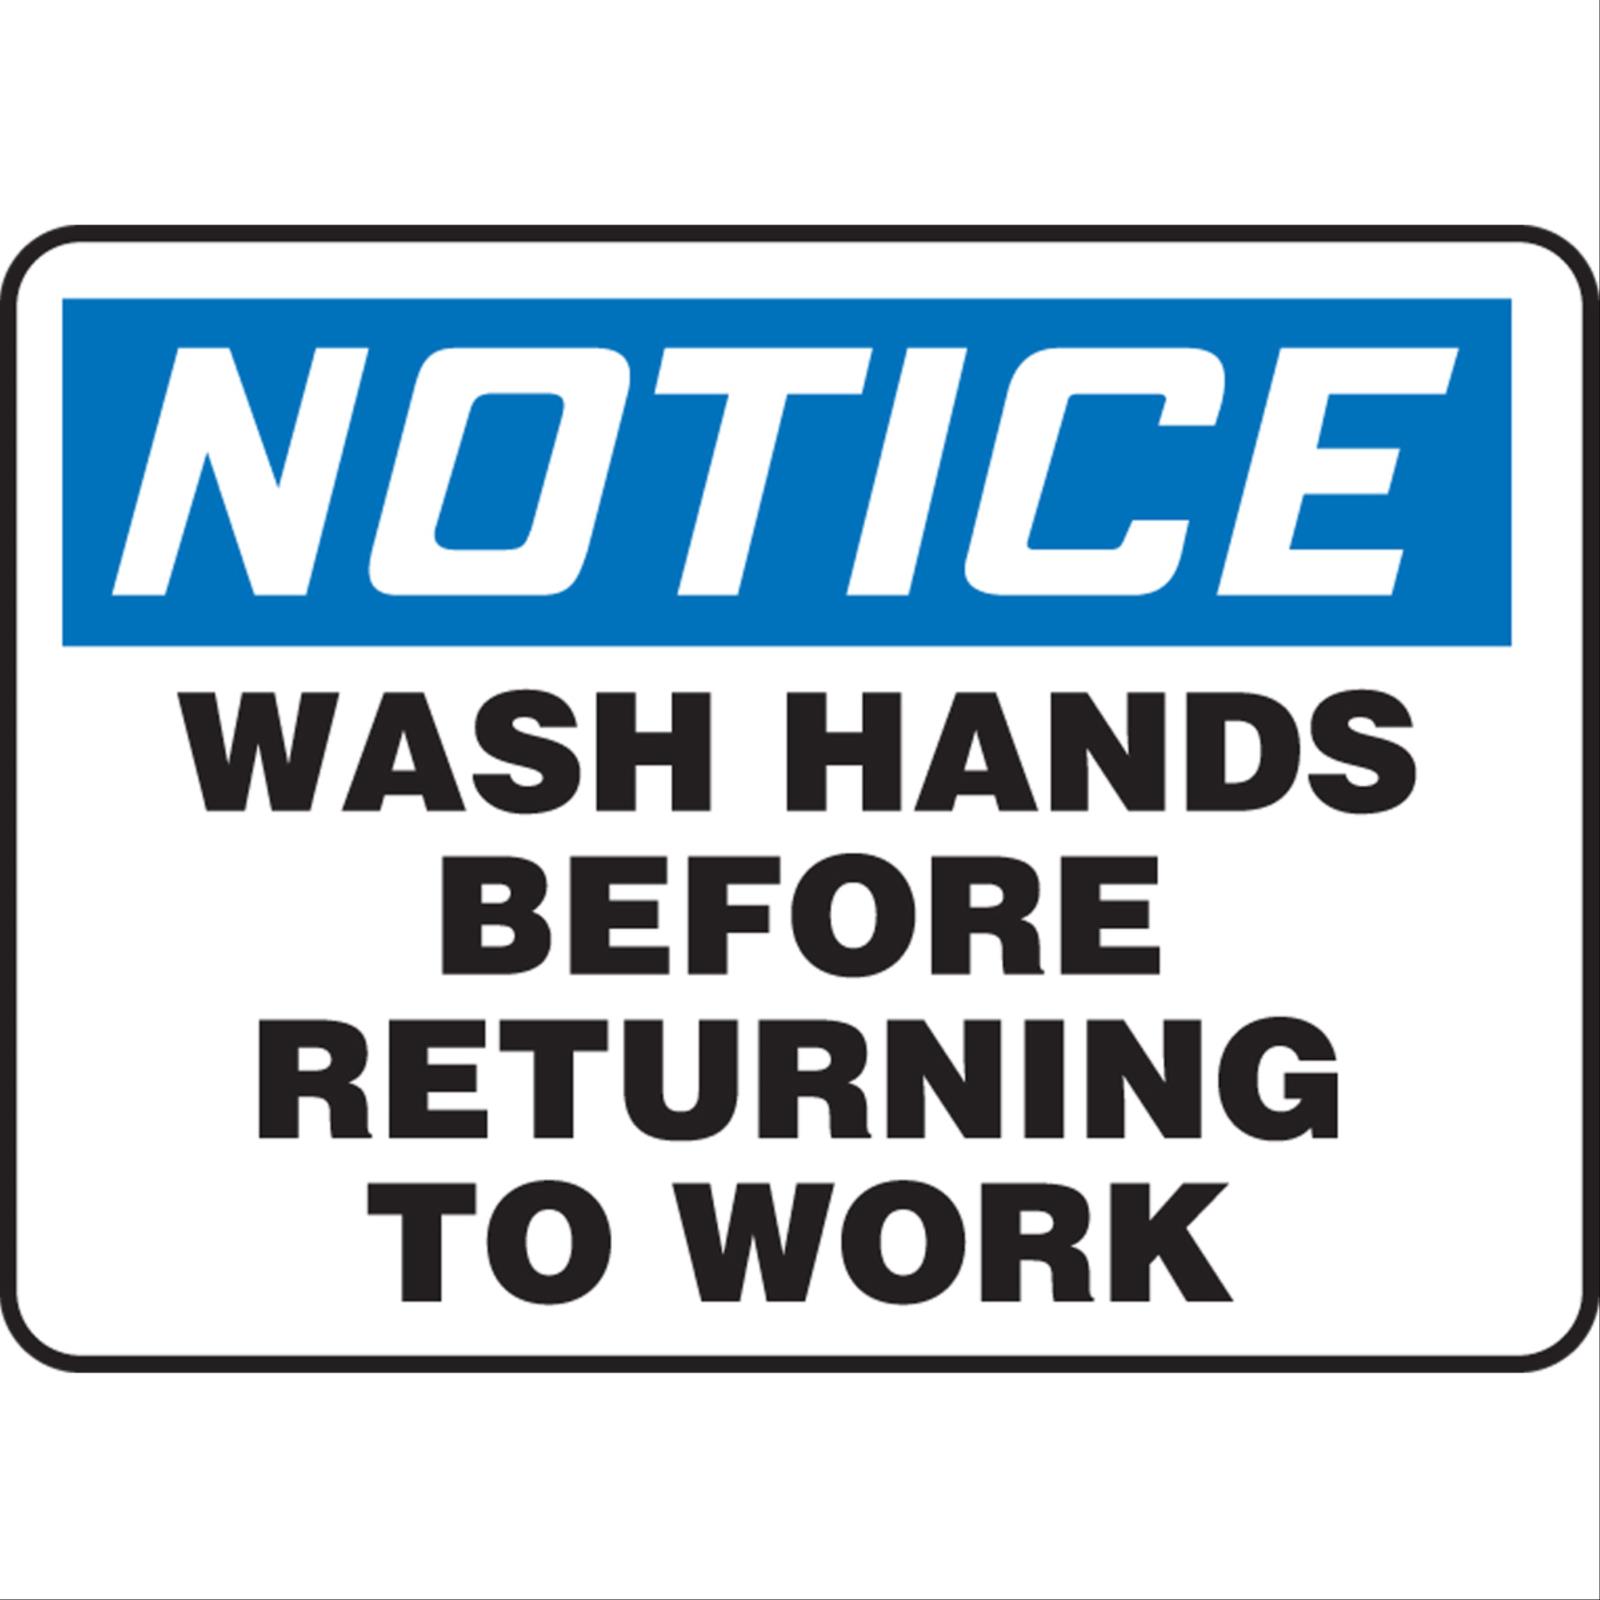 Notice Wash Hands Before Returning To Work Signs